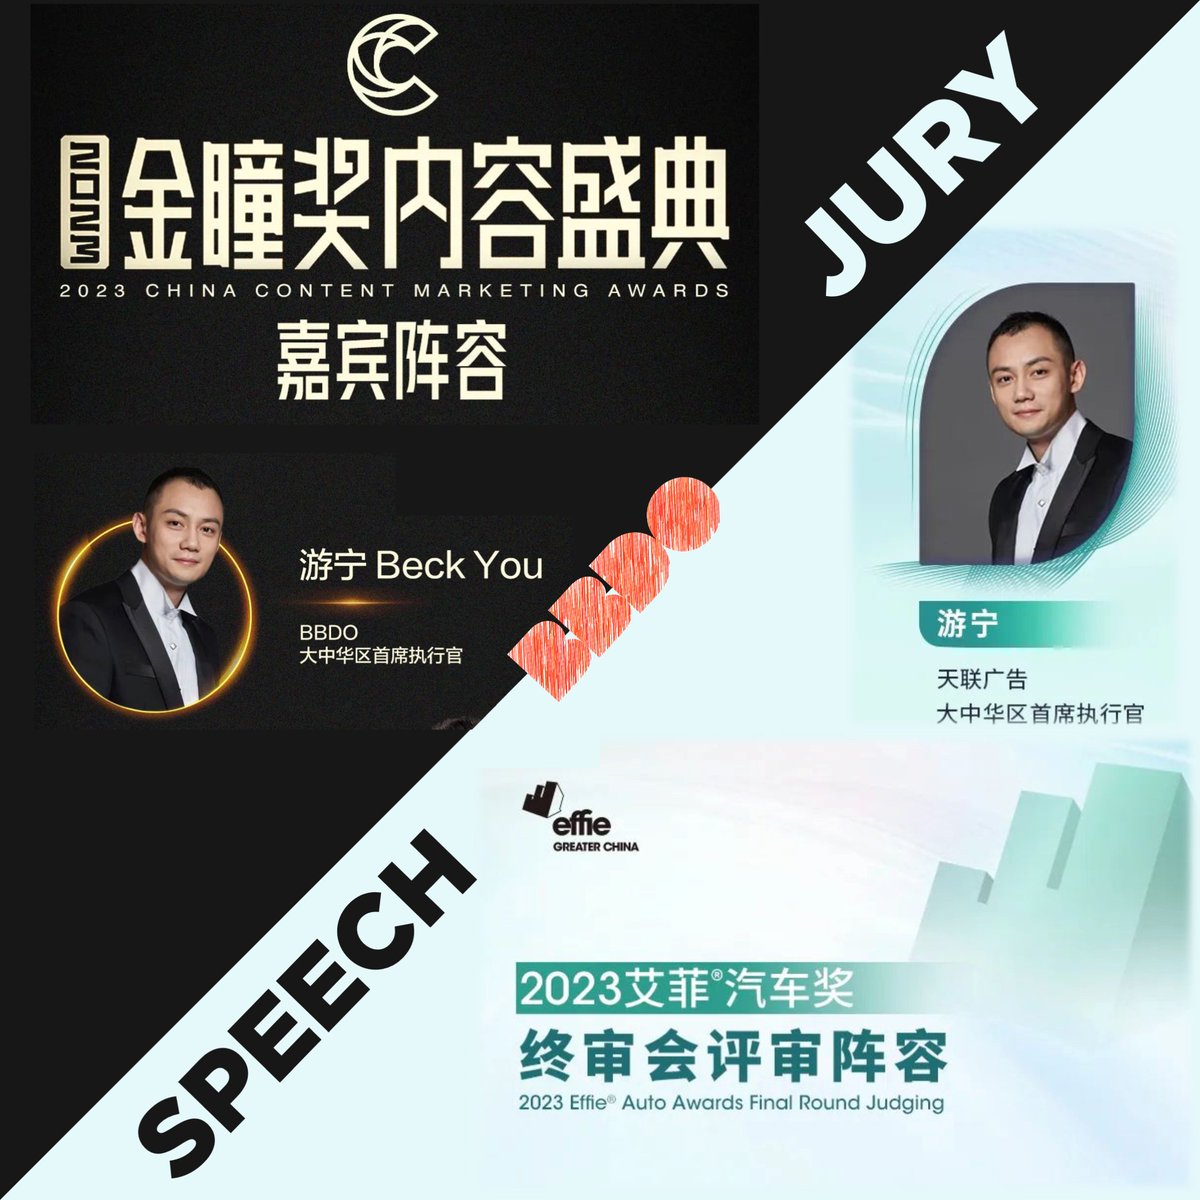 We're thrilled to announce that our very own CEO, Beck You, is serving as a Moderator at 2023 Effie Auto Awards, and is invited to be the speech guest in 2023 China content Marketing Awards. 👏